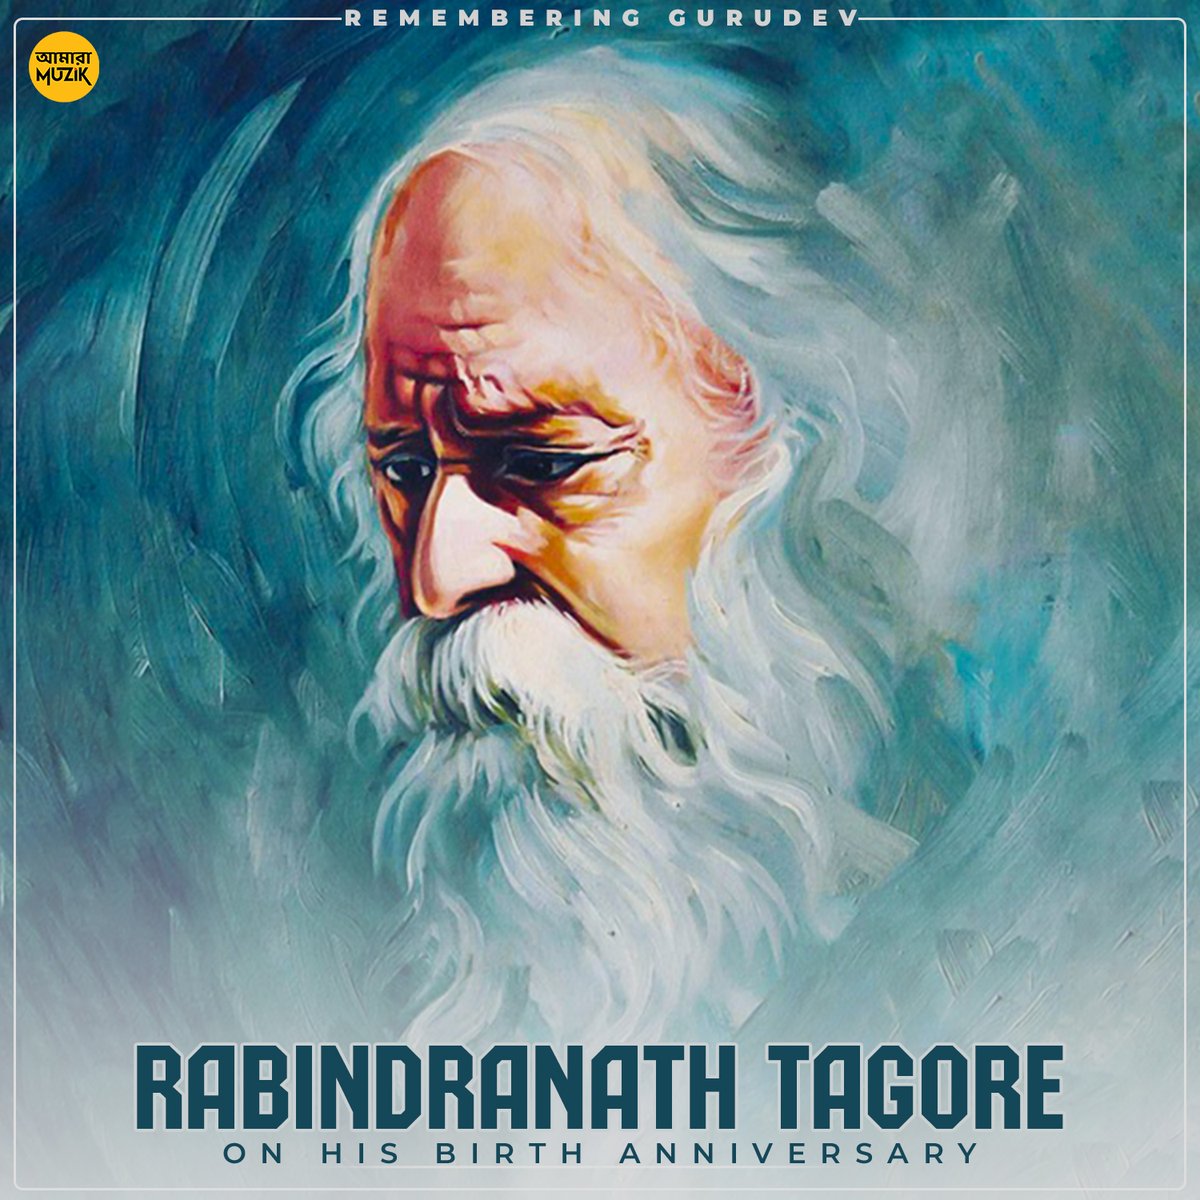 Remembering Gurudev #RabindranathTagore, the greatest cultural icon in India whose words continue to inspire and uplift #humanity on his birth anniversary.

May his wisdom and creativity inspire us to spread love, #peace, and harmony in the world.

#AmaraMuzikBengali 
#AmaraMuzik